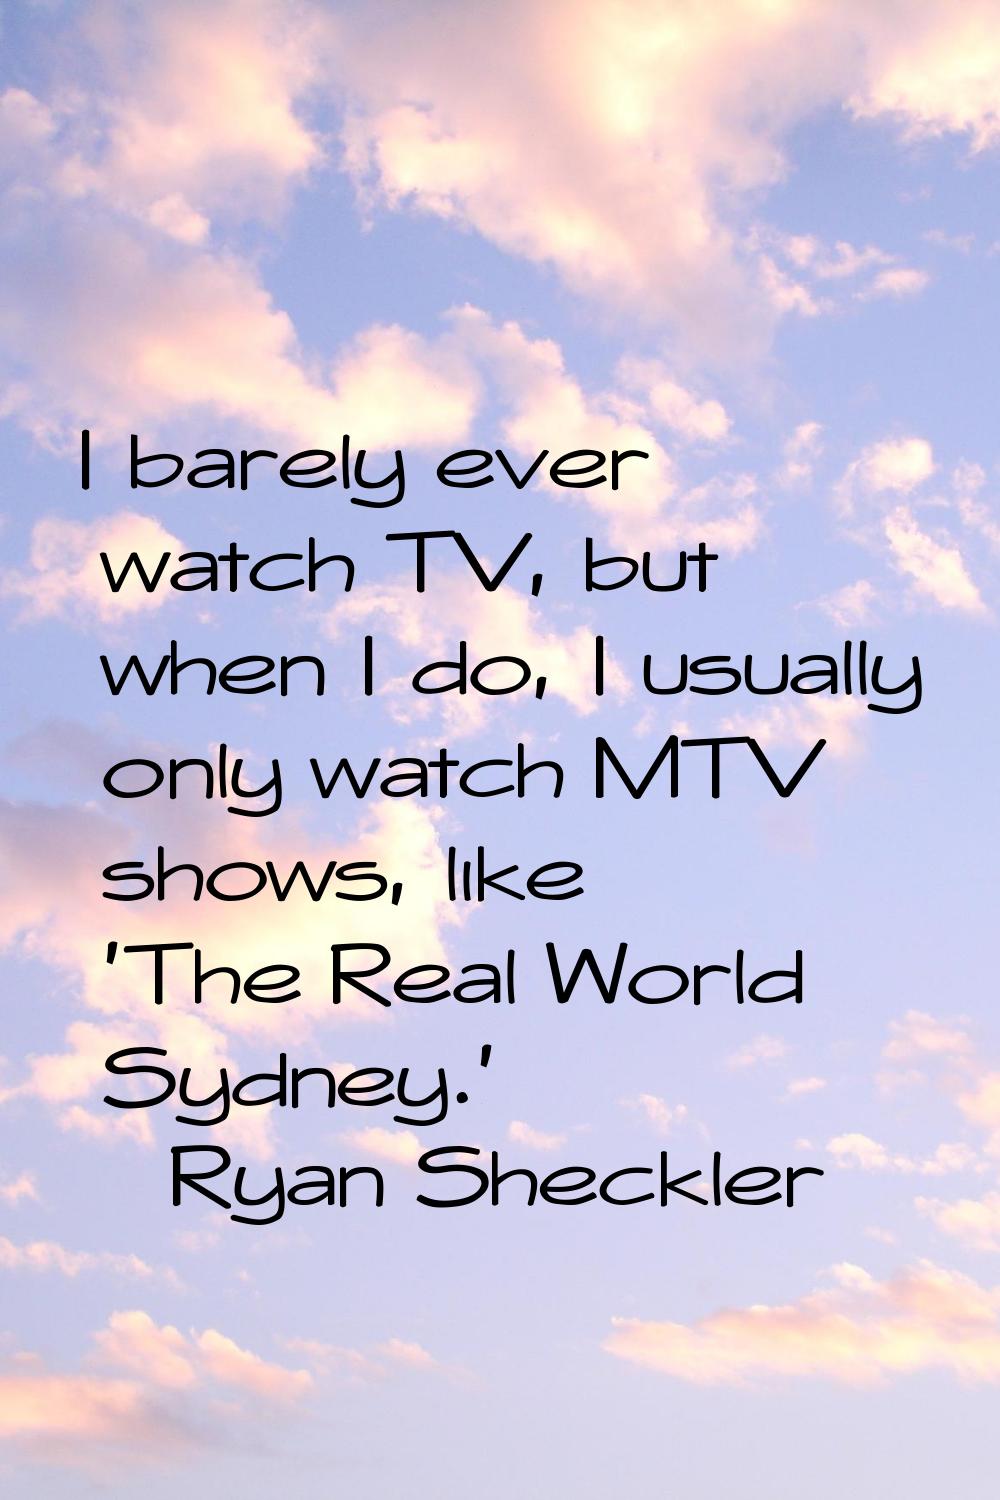 I barely ever watch TV, but when I do, I usually only watch MTV shows, like 'The Real World Sydney.